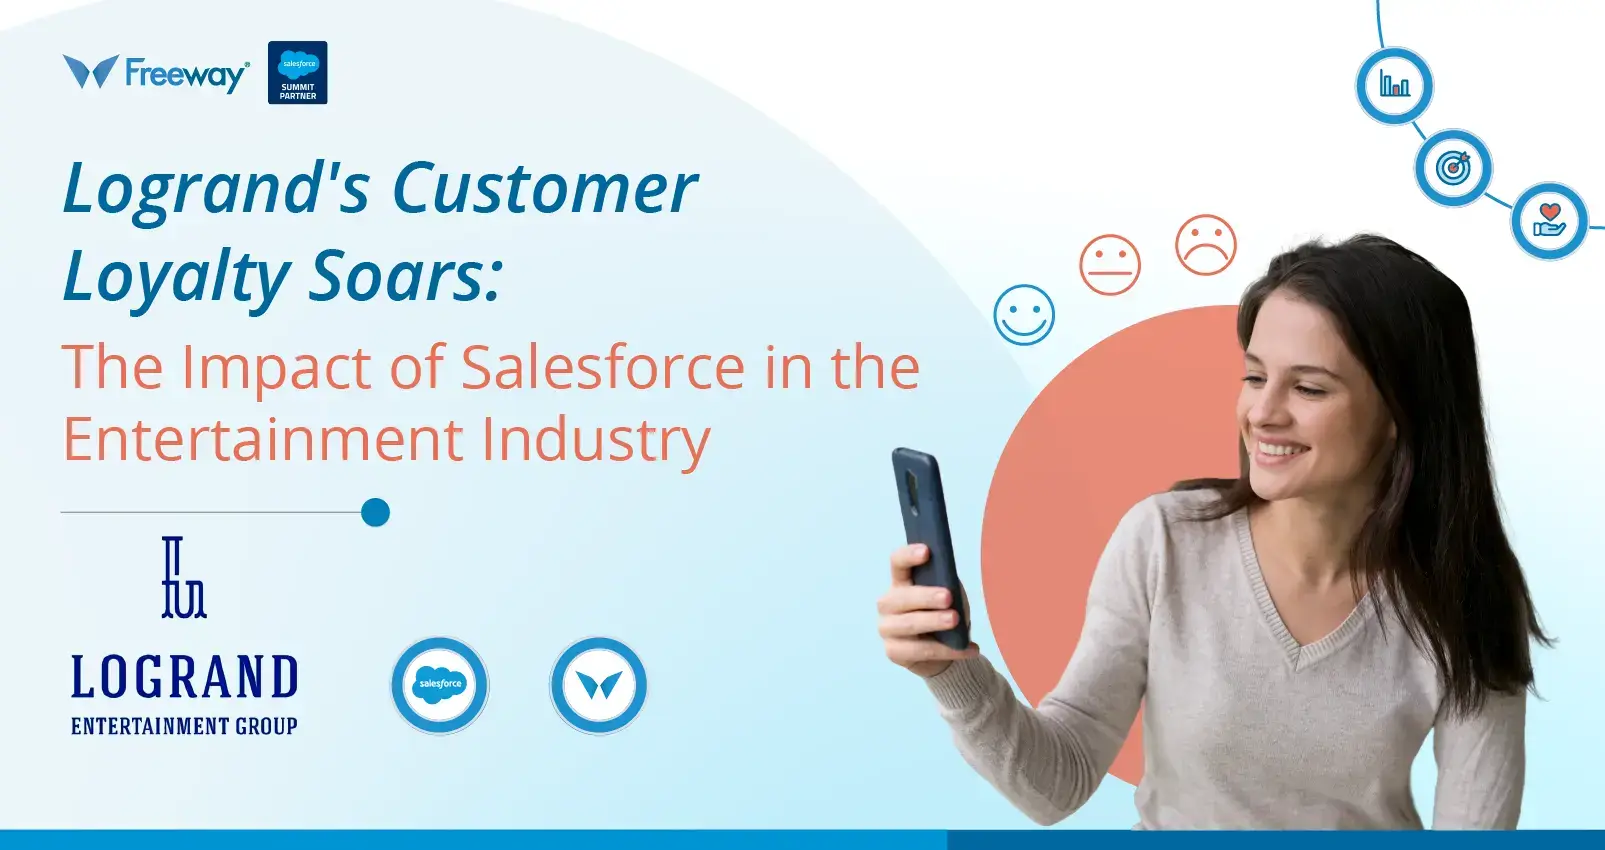 Logrand Entertainment Group Transforms Customer Experience and Boosts Loyalty with Salesforce, Powered by Freeway Consulting